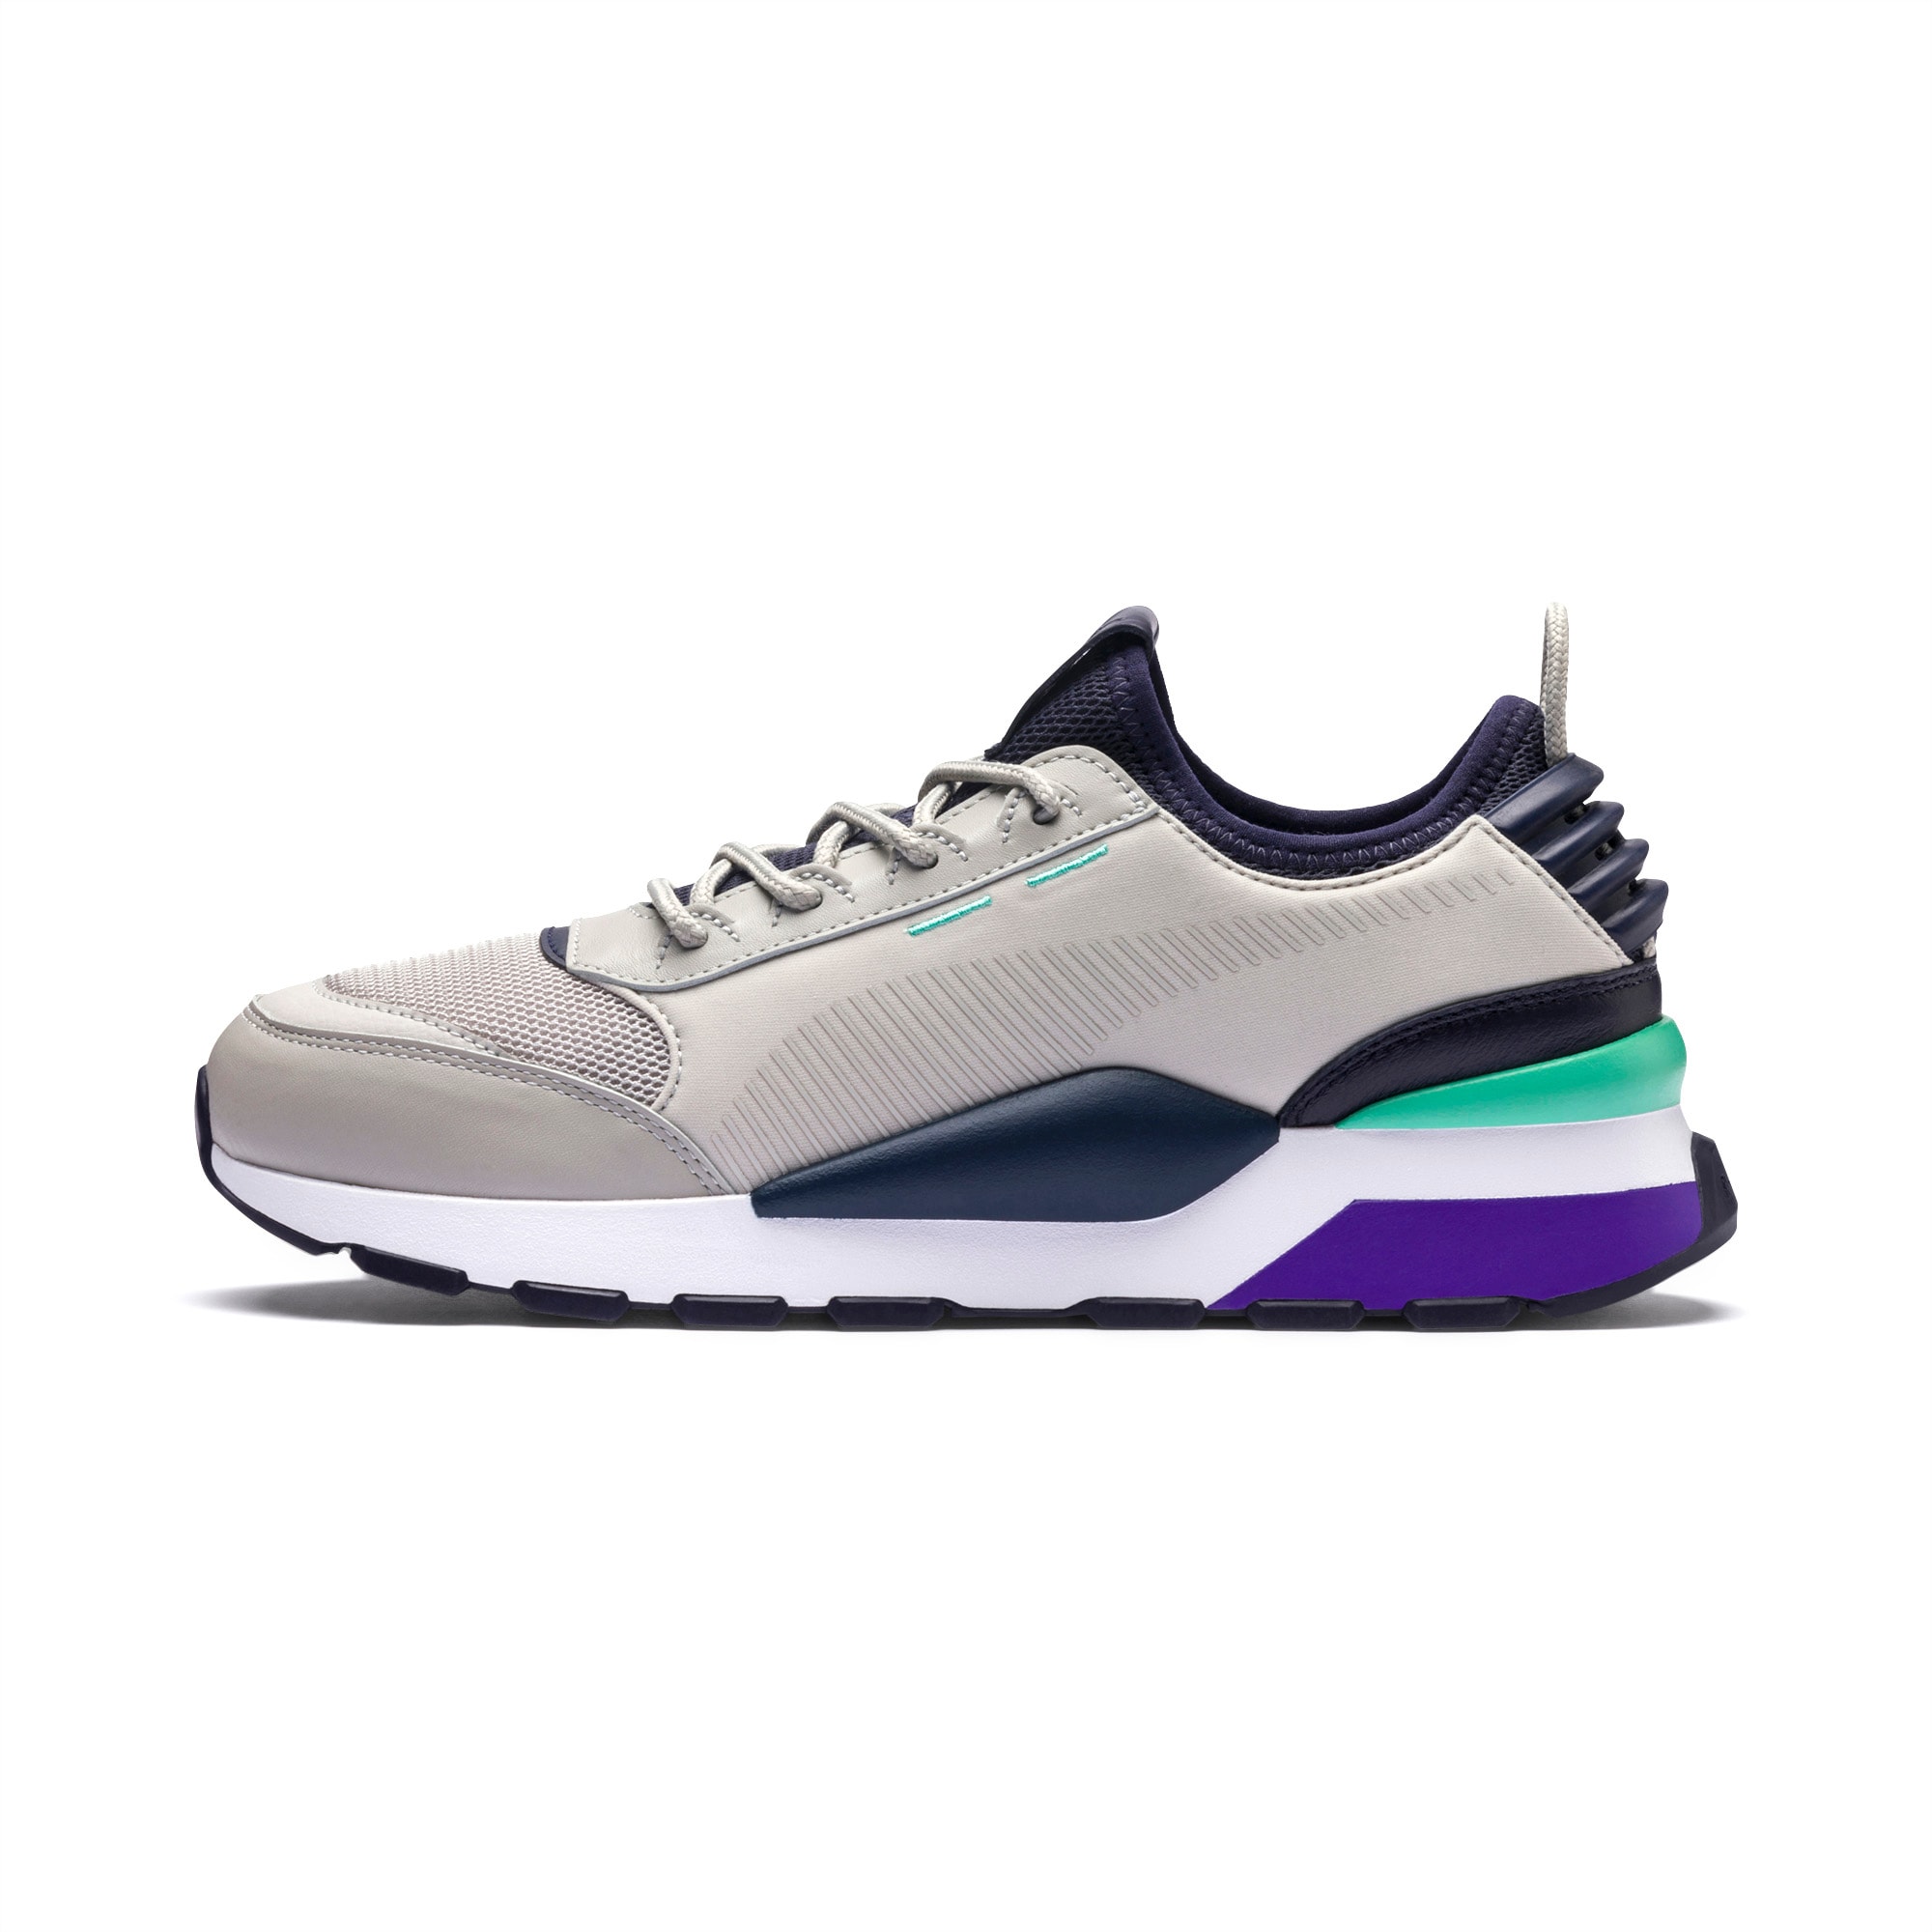 RS-0 TRACKS Trainers, 02, large